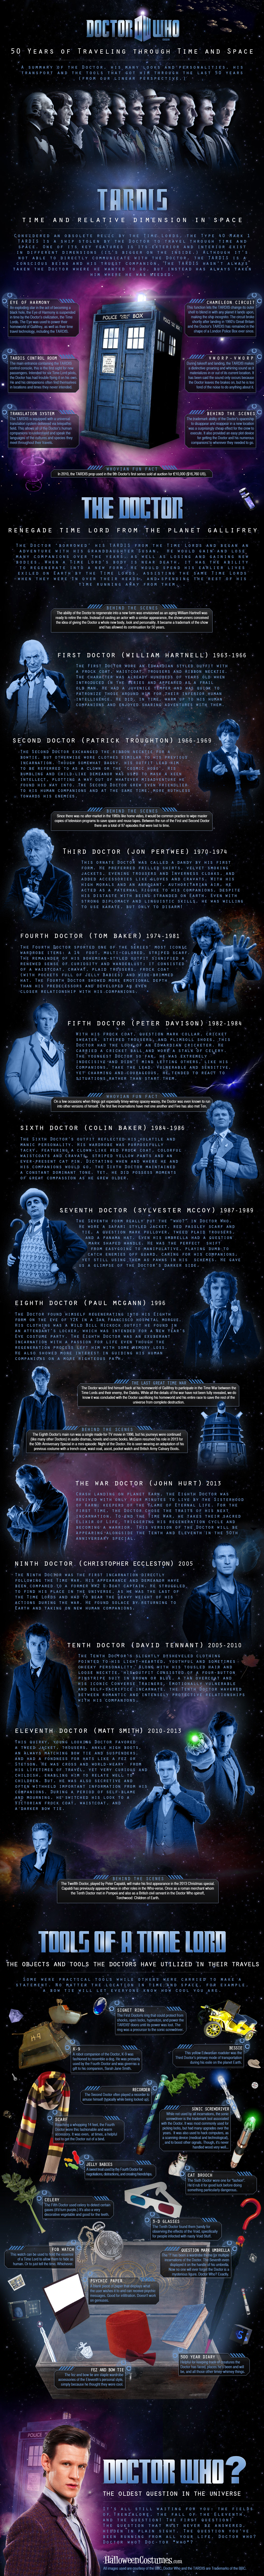 Doctor Who Infographic: 50 Years of Traveling in Time and Space